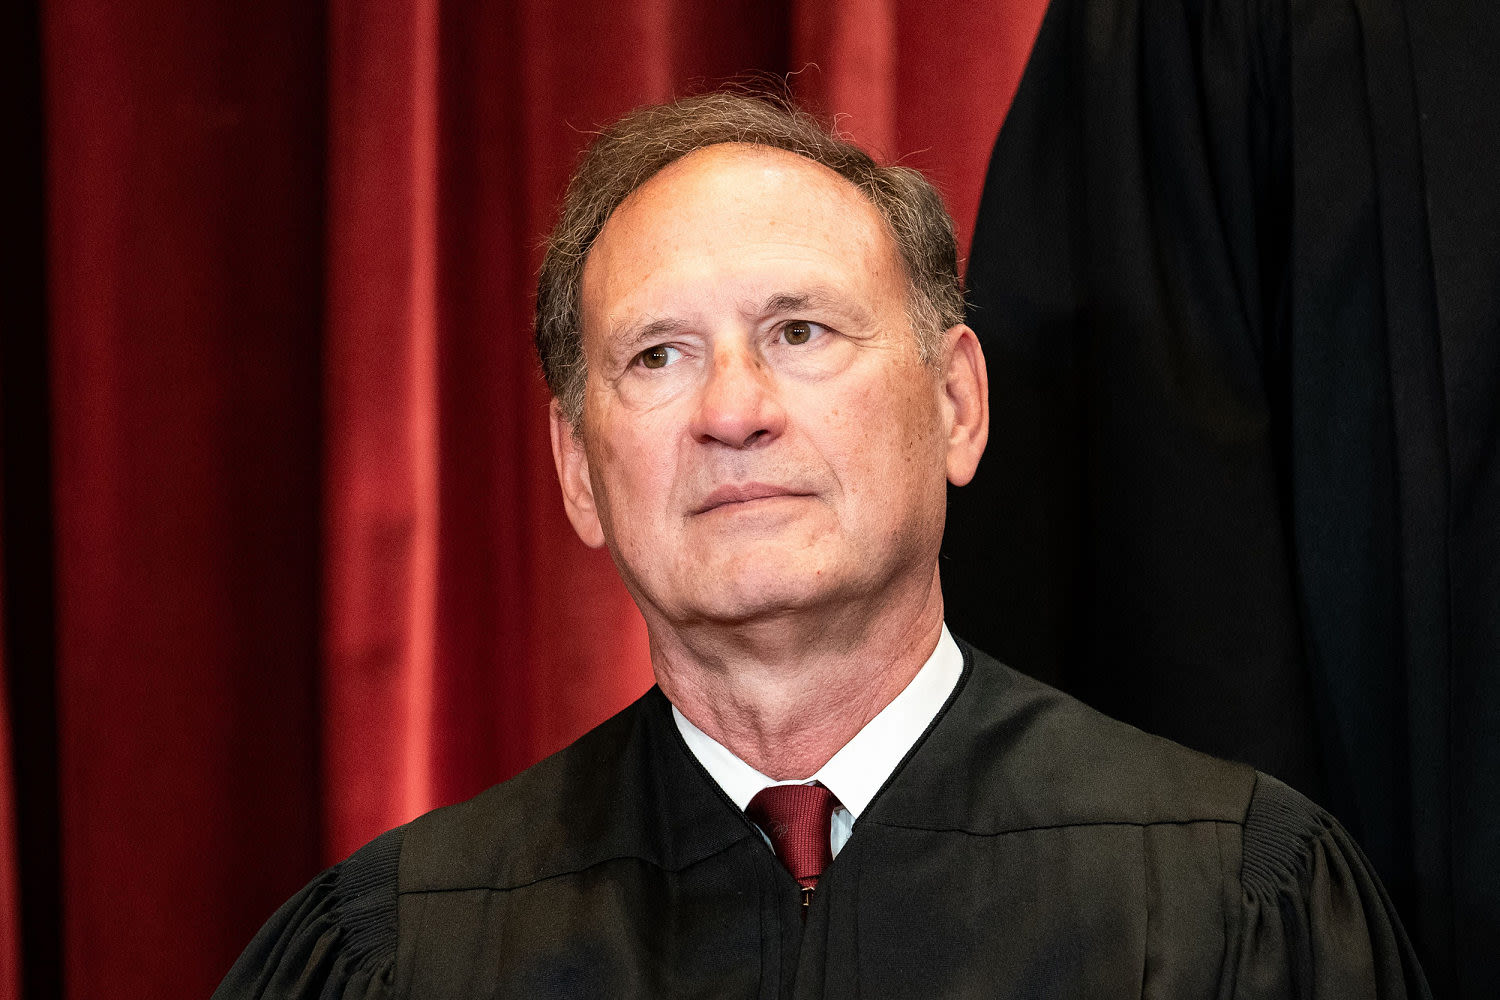 Maddow Blog | Why Justice Samuel Alito’s upside-down flag controversy matters